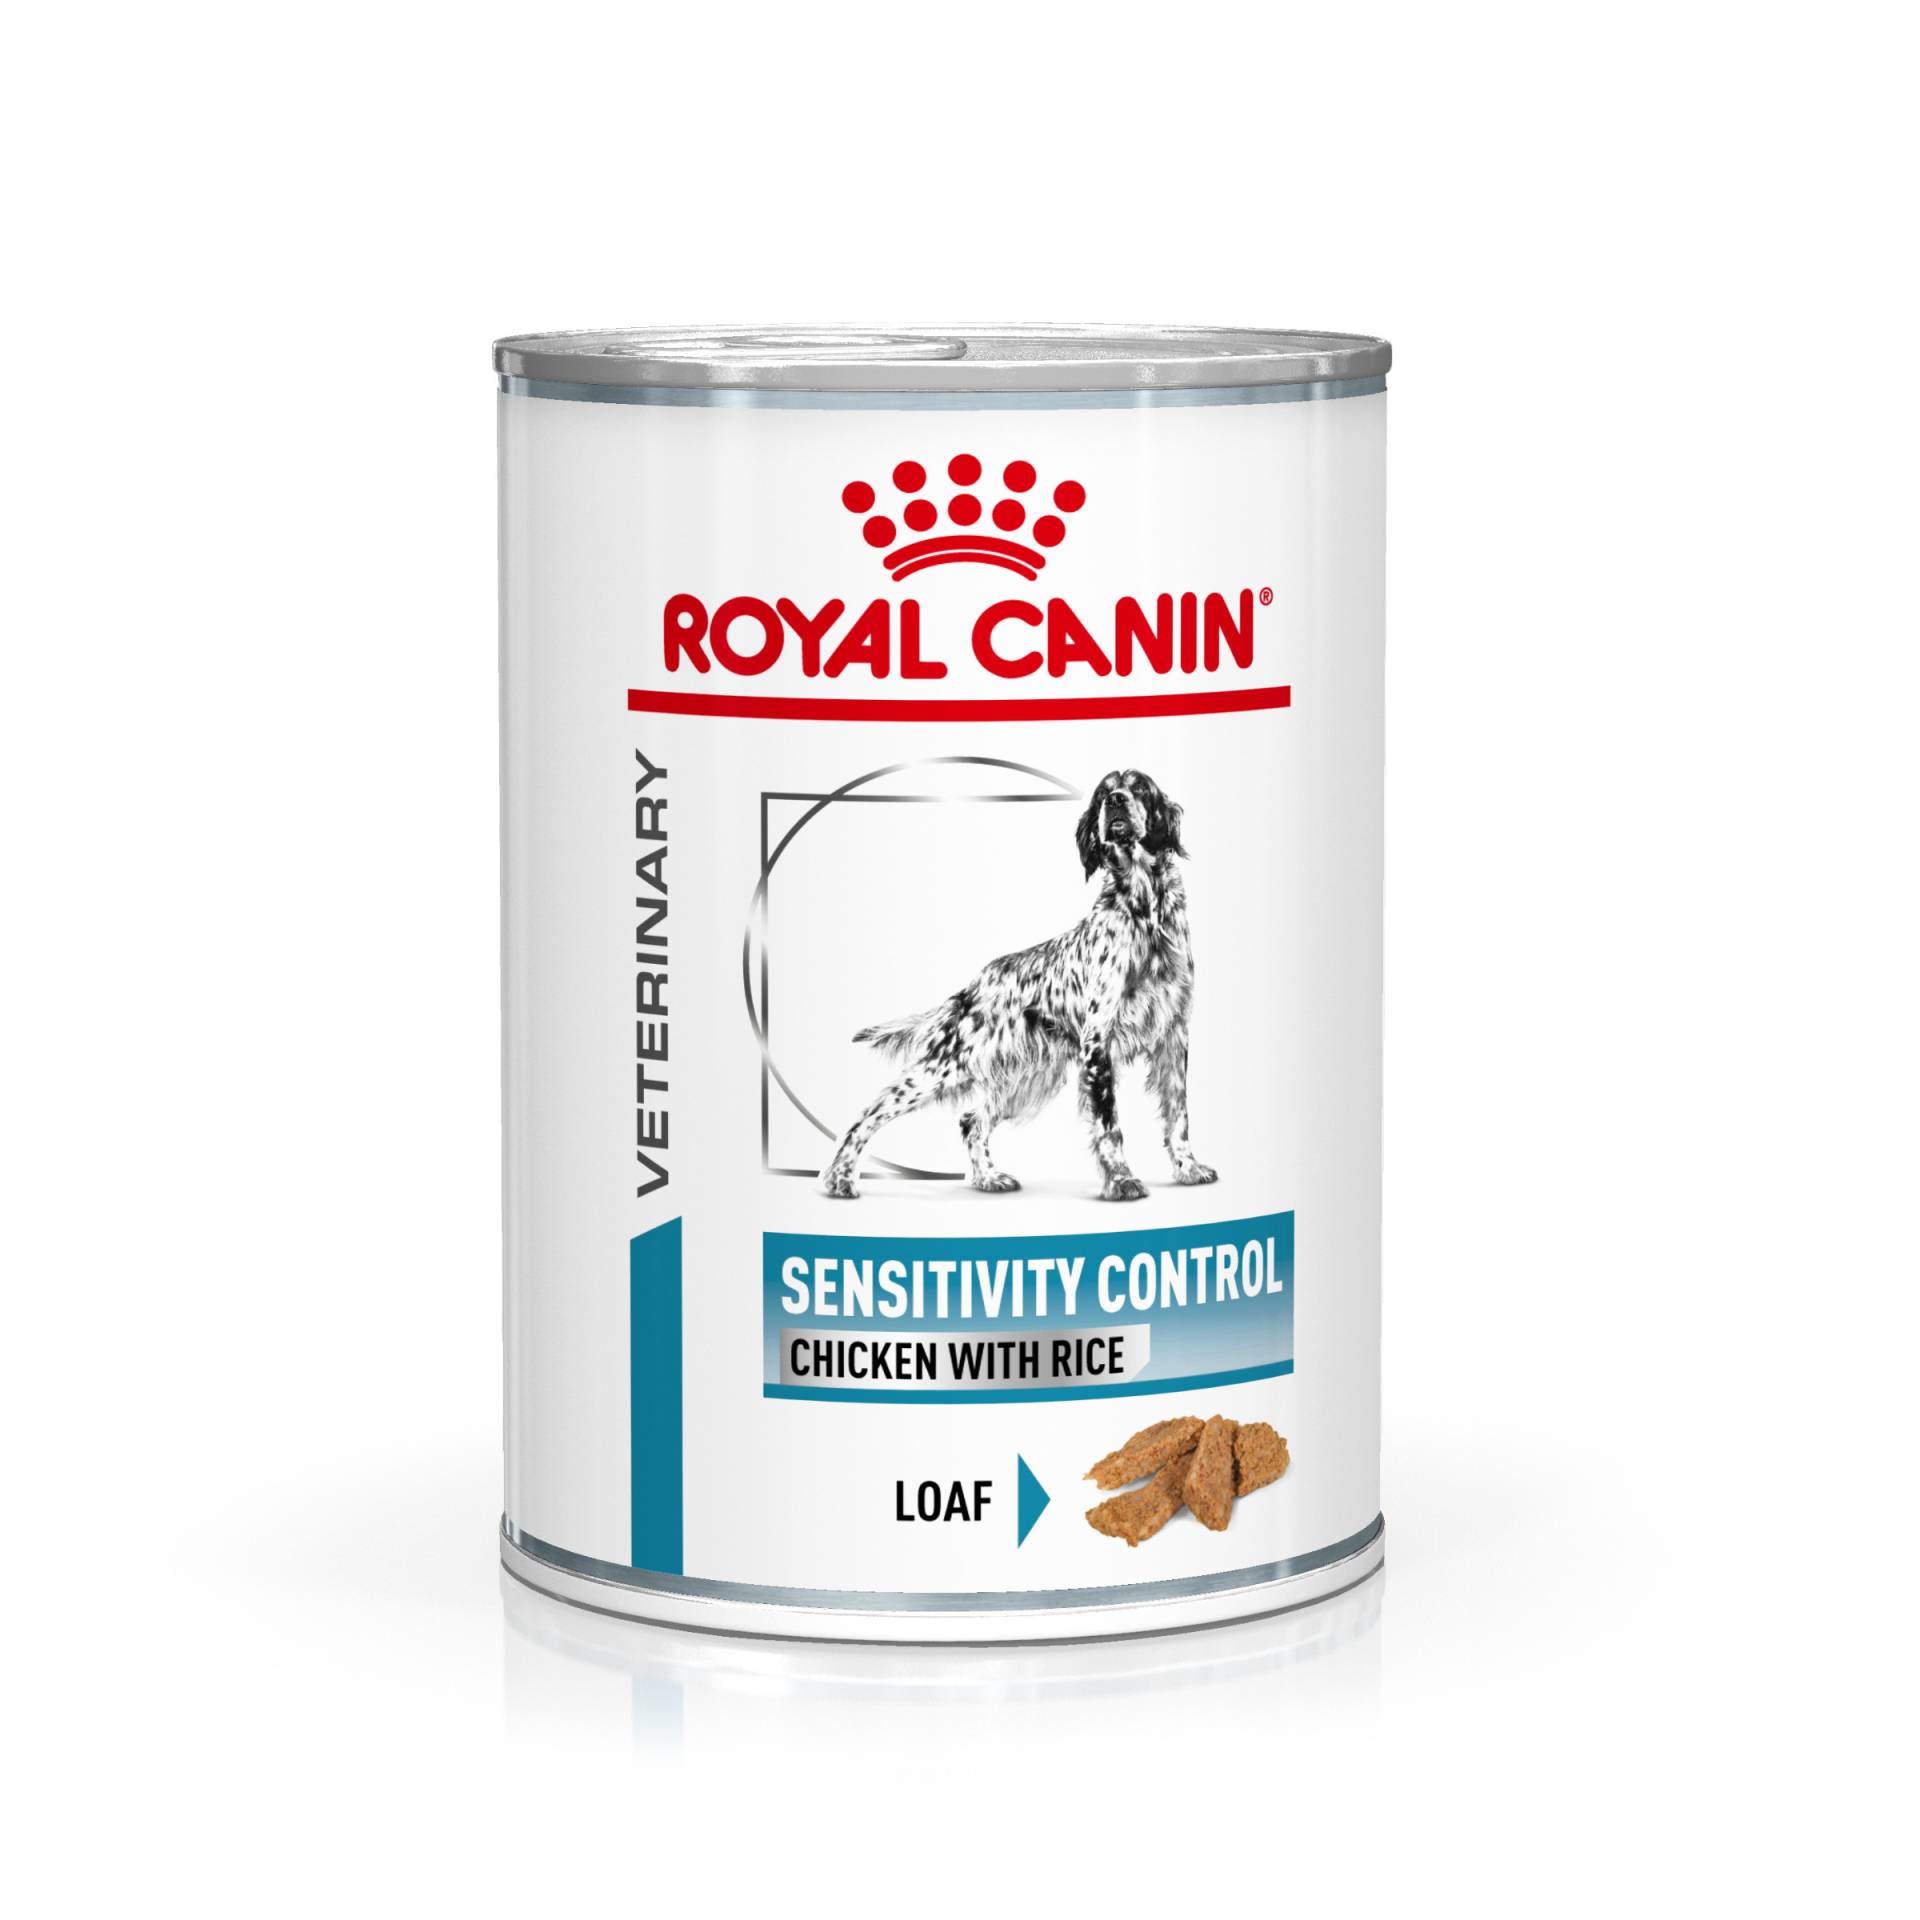 Royal Canin Veterinary Canine Sensitivity Control Huhn & Reis Mousse - 12 x 410 g von Royal Canin Veterinary Diet